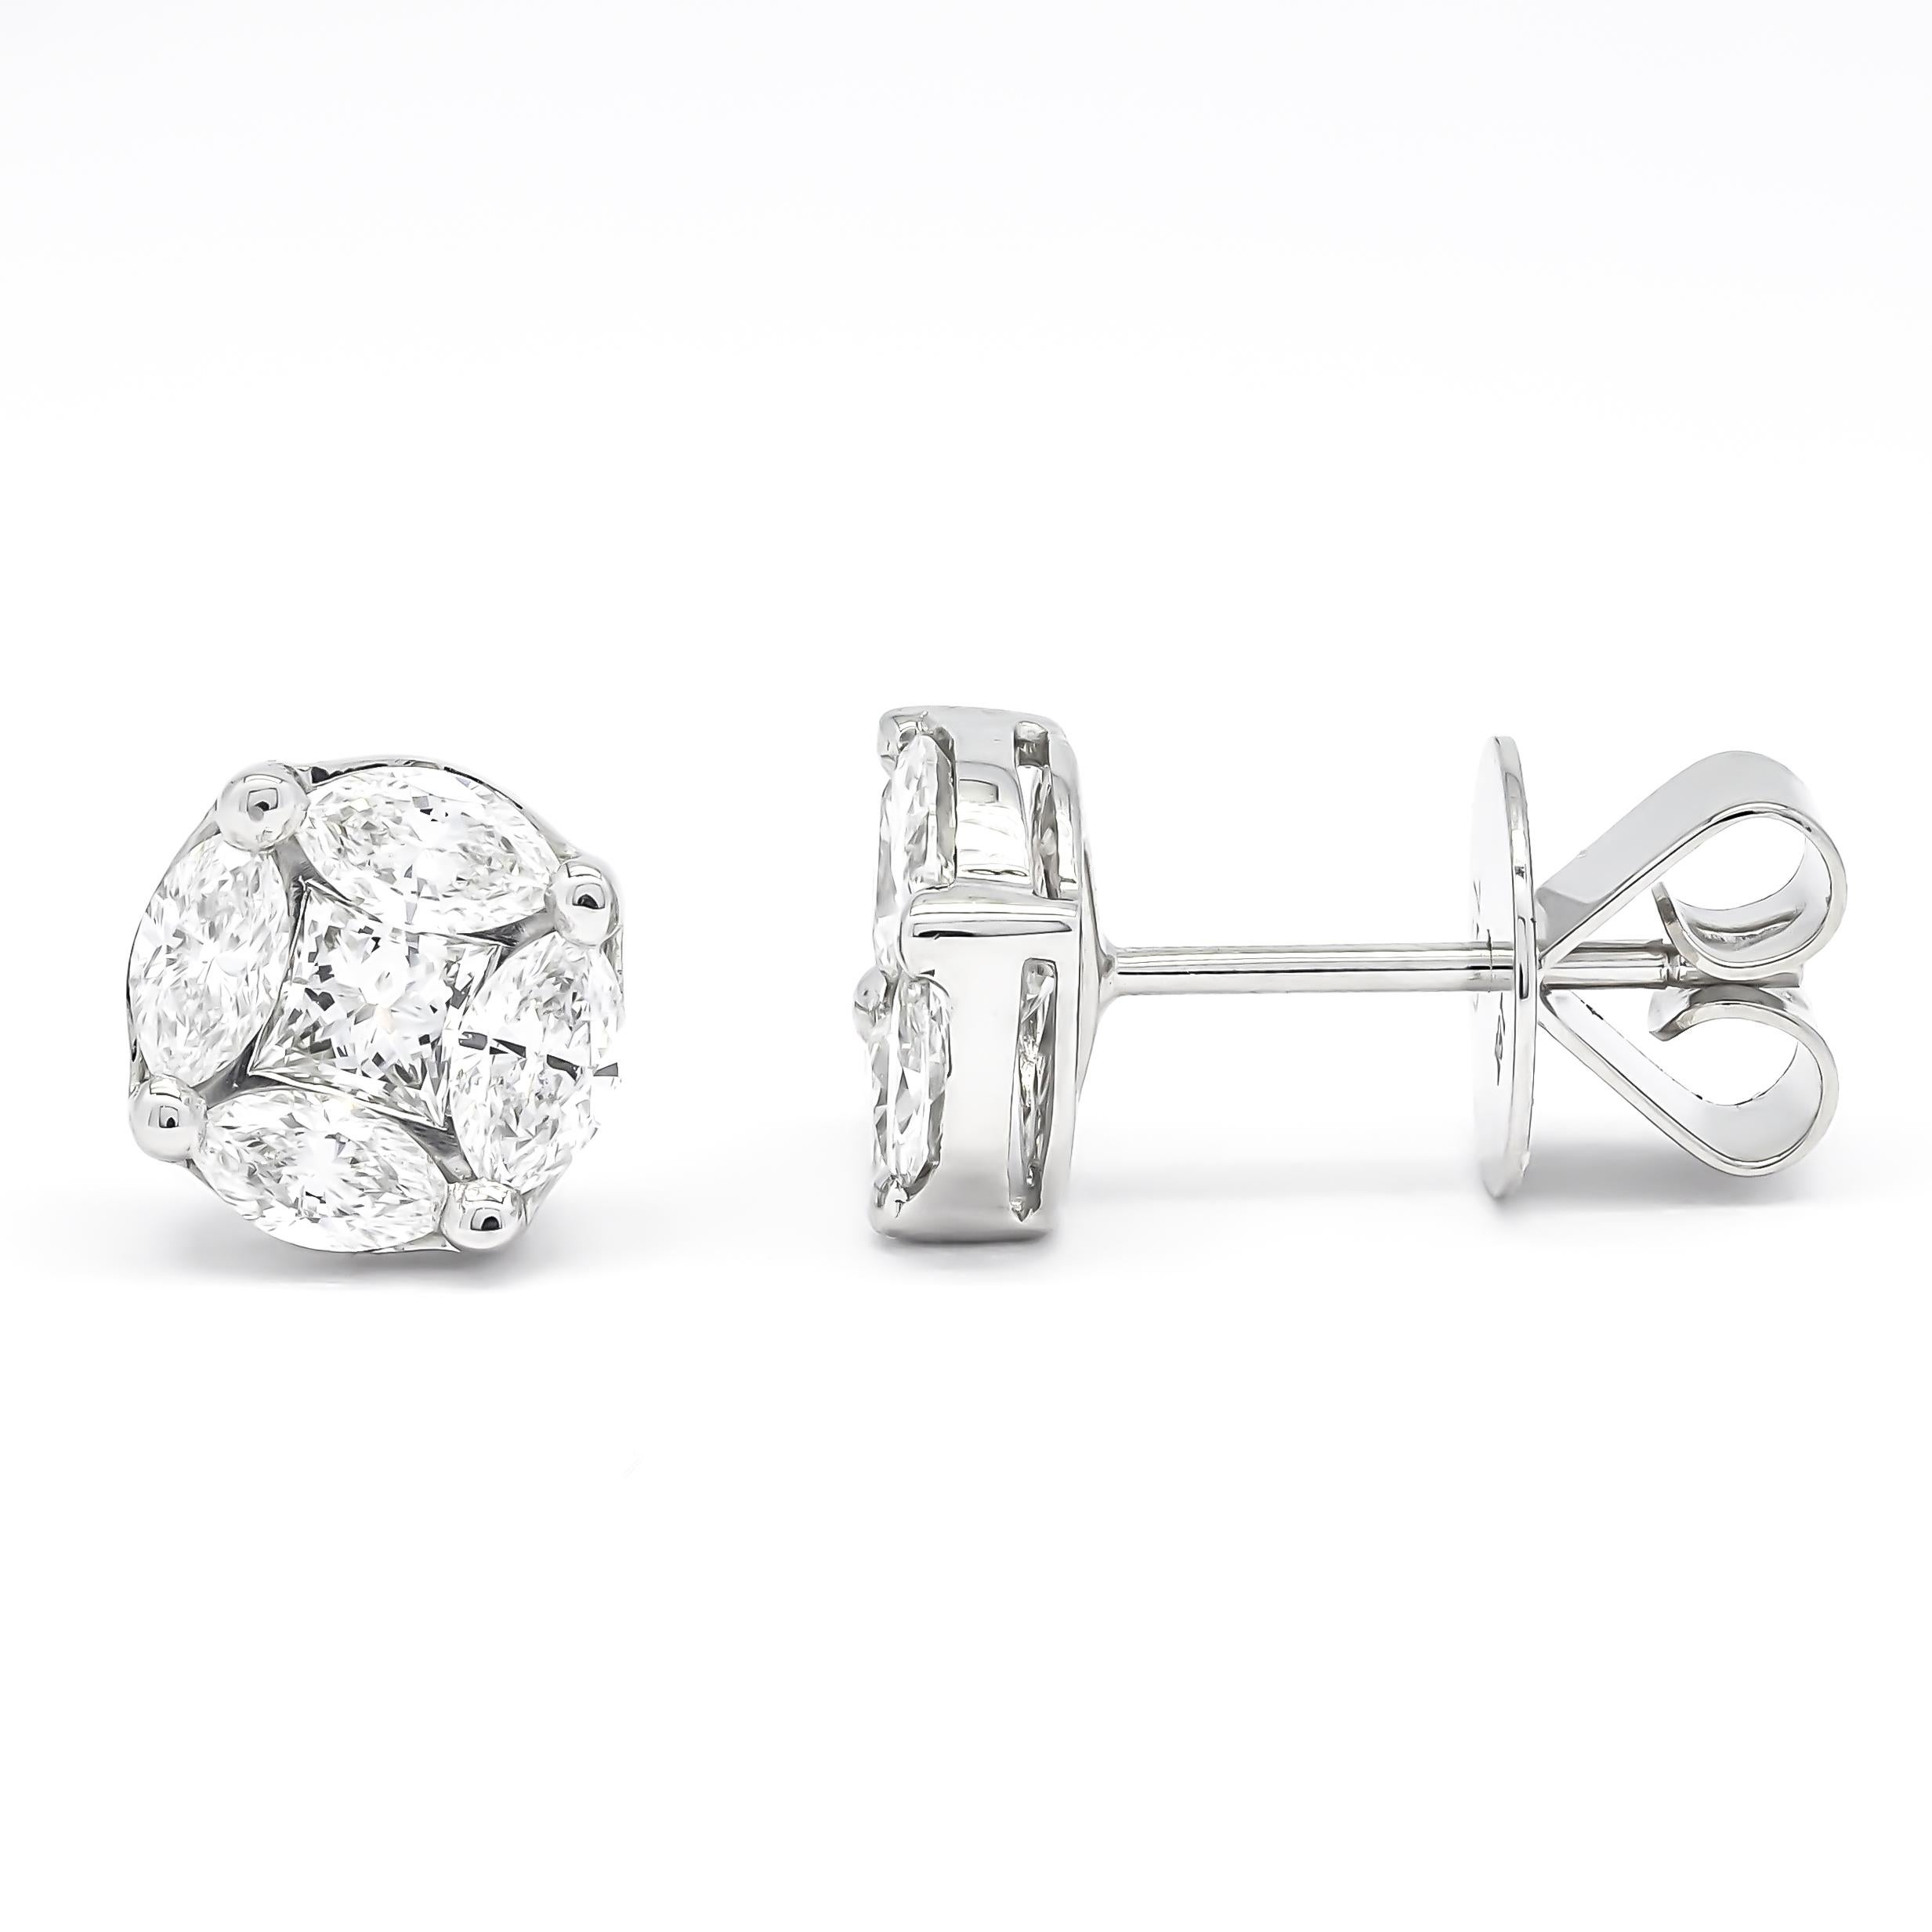 Prepare to be dazzled by the sheer radiance of these elegant diamond stud earrings. Featuring a stunning design, they showcase glittery marquise diamond accents that beautifully wrap around a mesmerizing princess-cut center stone.

The princess-cut